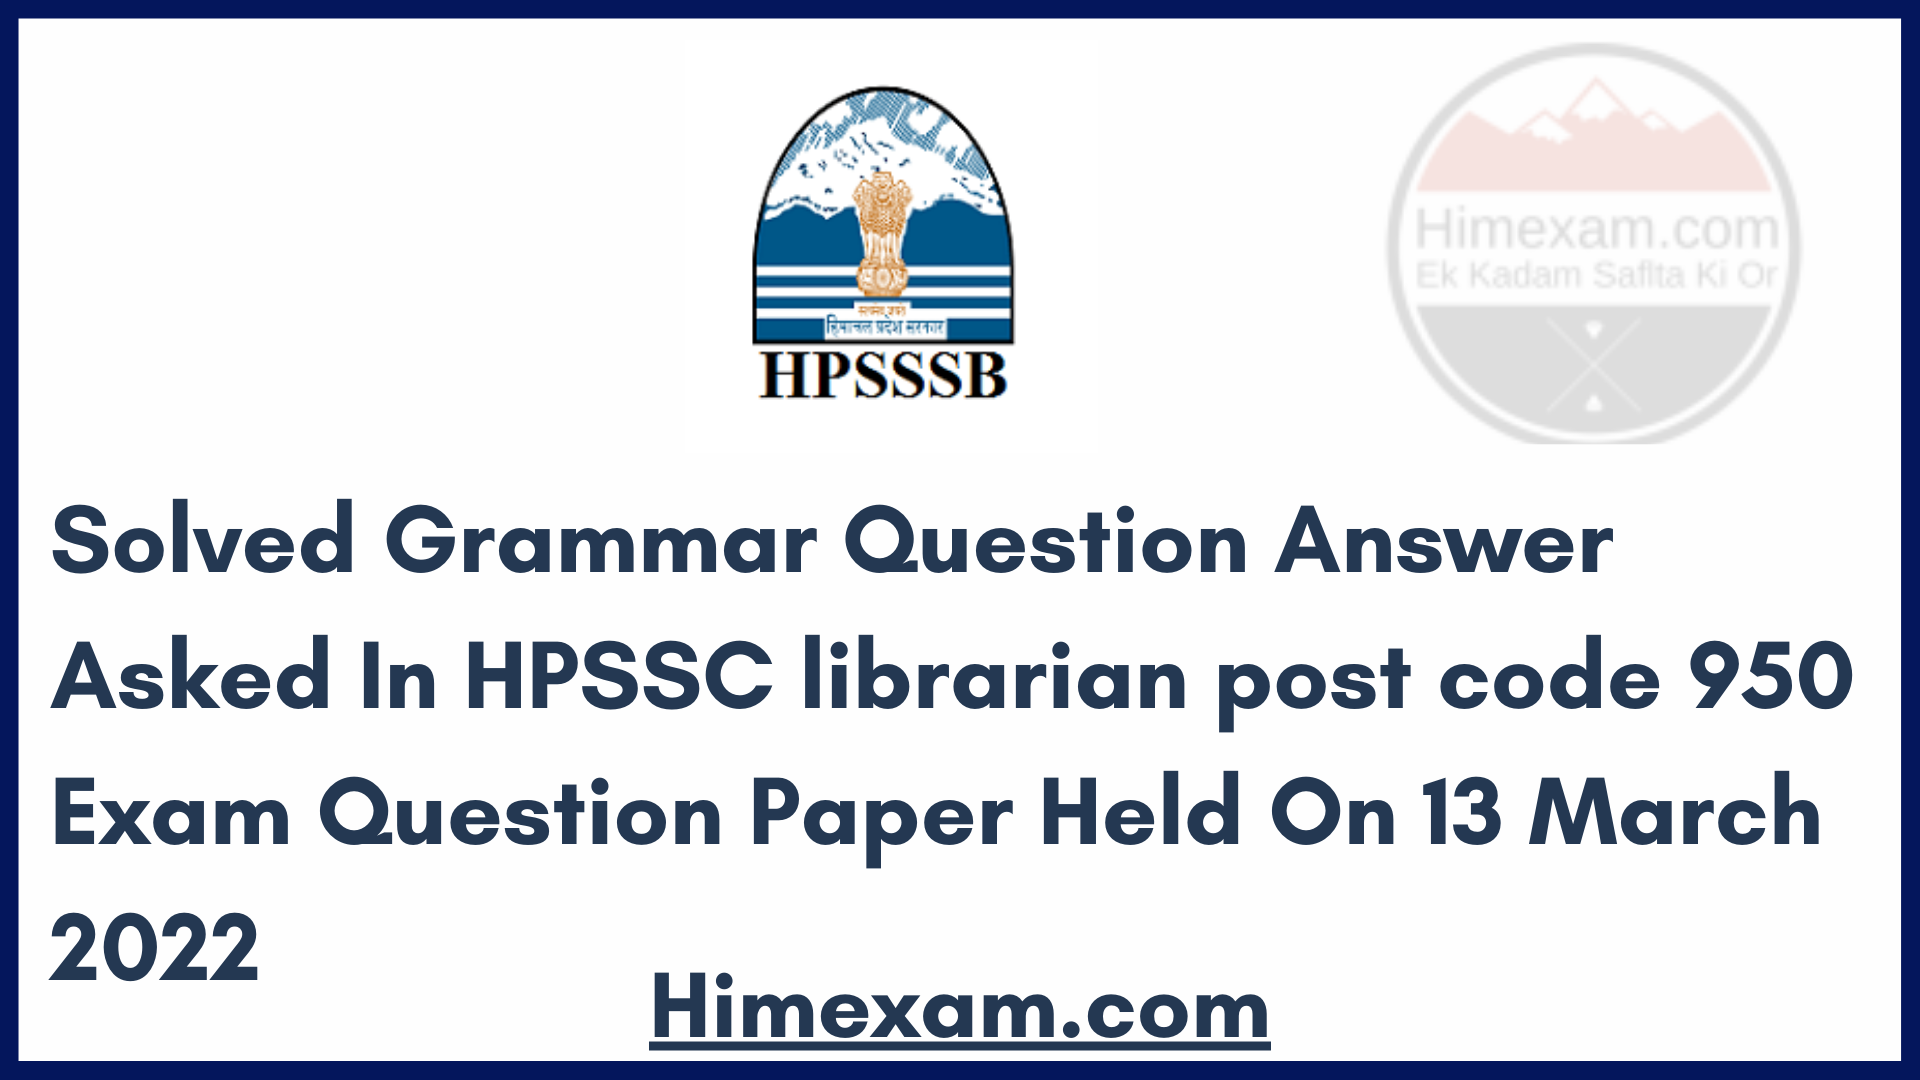 Solved Grammar Question Answer Asked In HPSSC librarian post code 950  Exam Question Paper Held On 13 March 2022